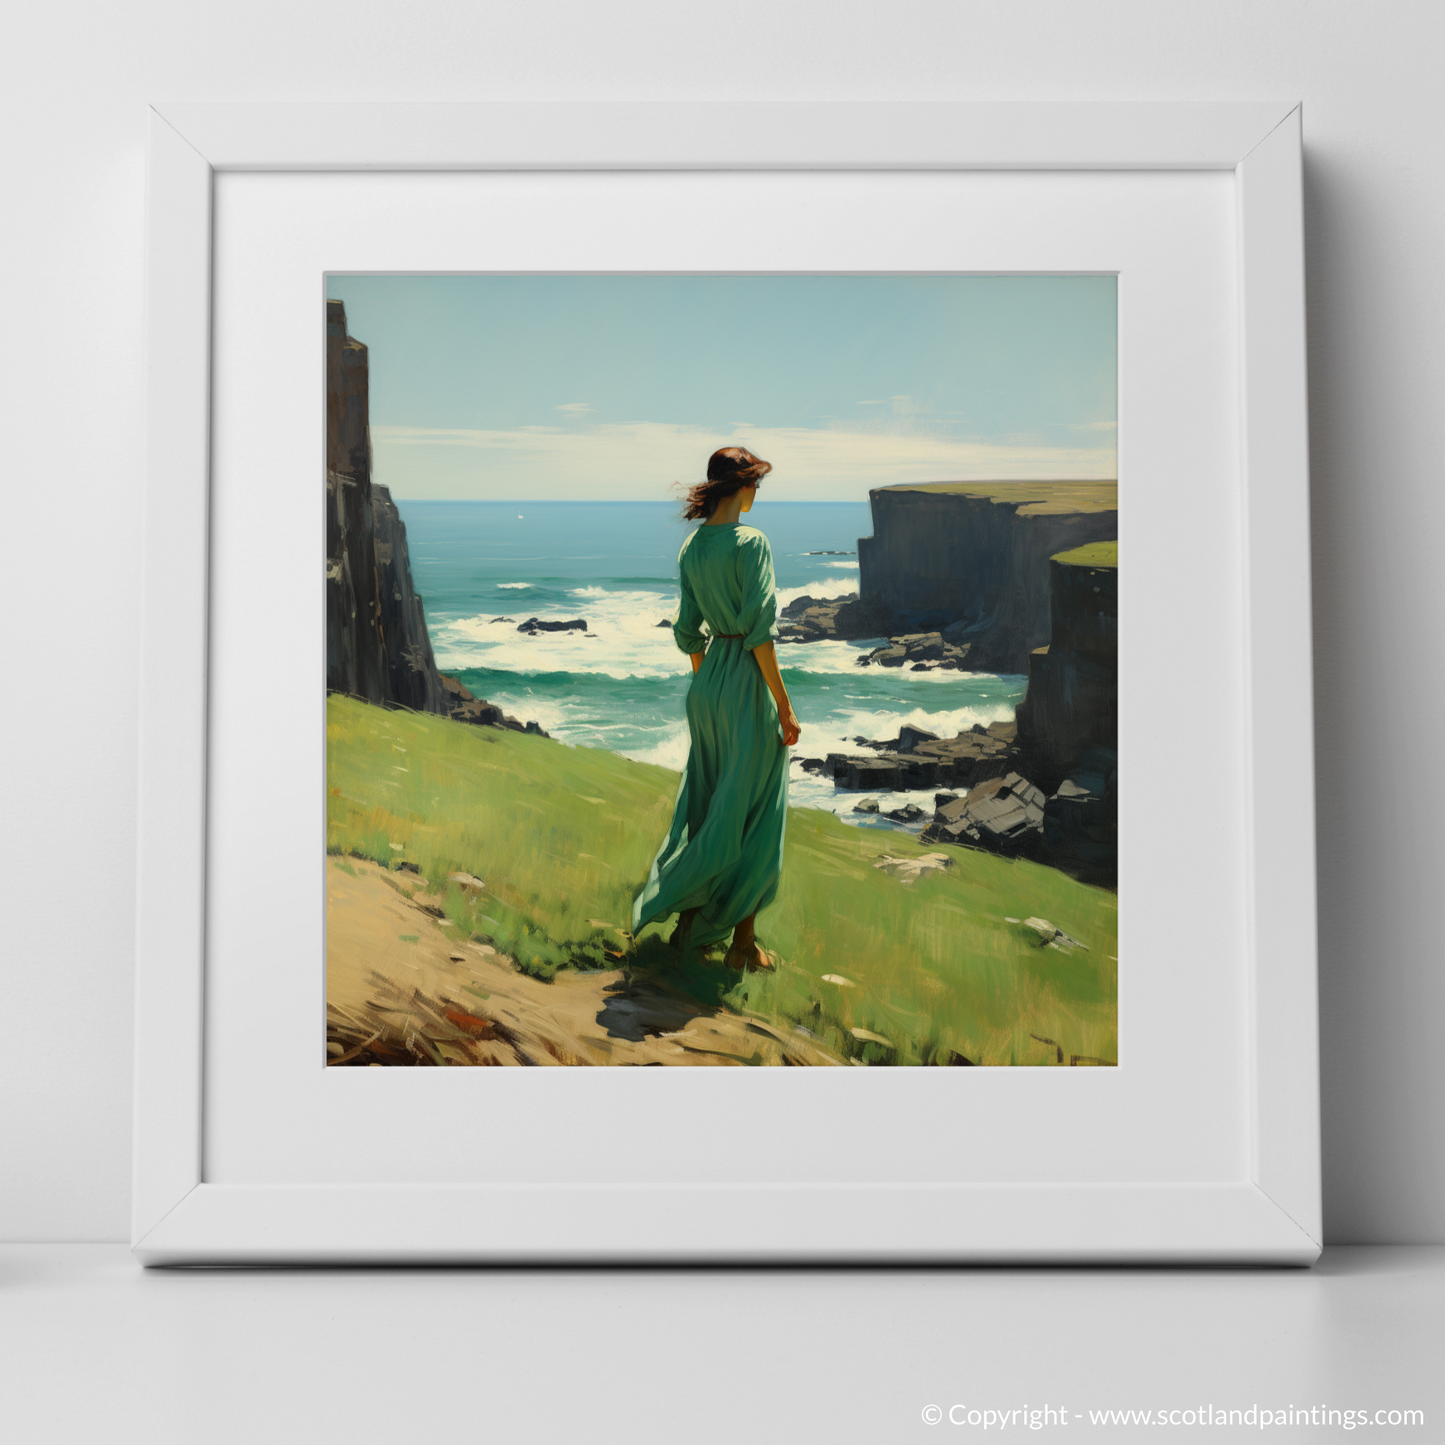 Caithness Cliffs: The Sentinel of Scotland's Shore